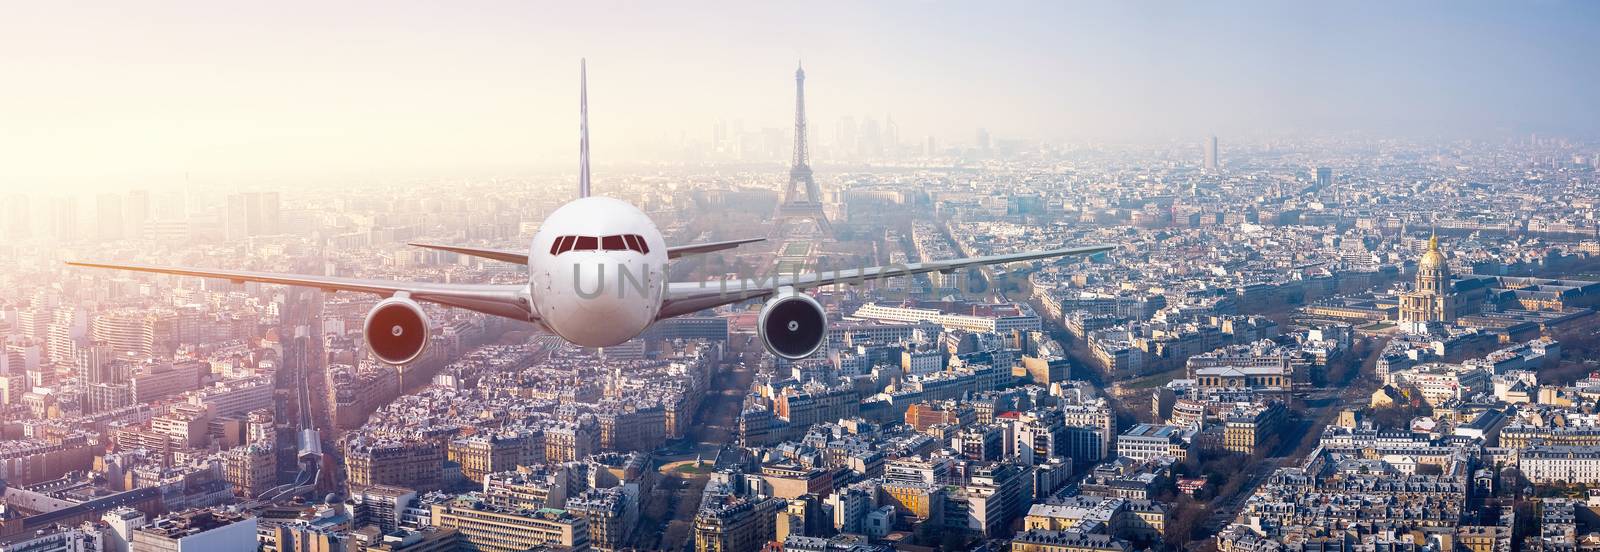 Airplane frying over the center of Paris, France by Surasak